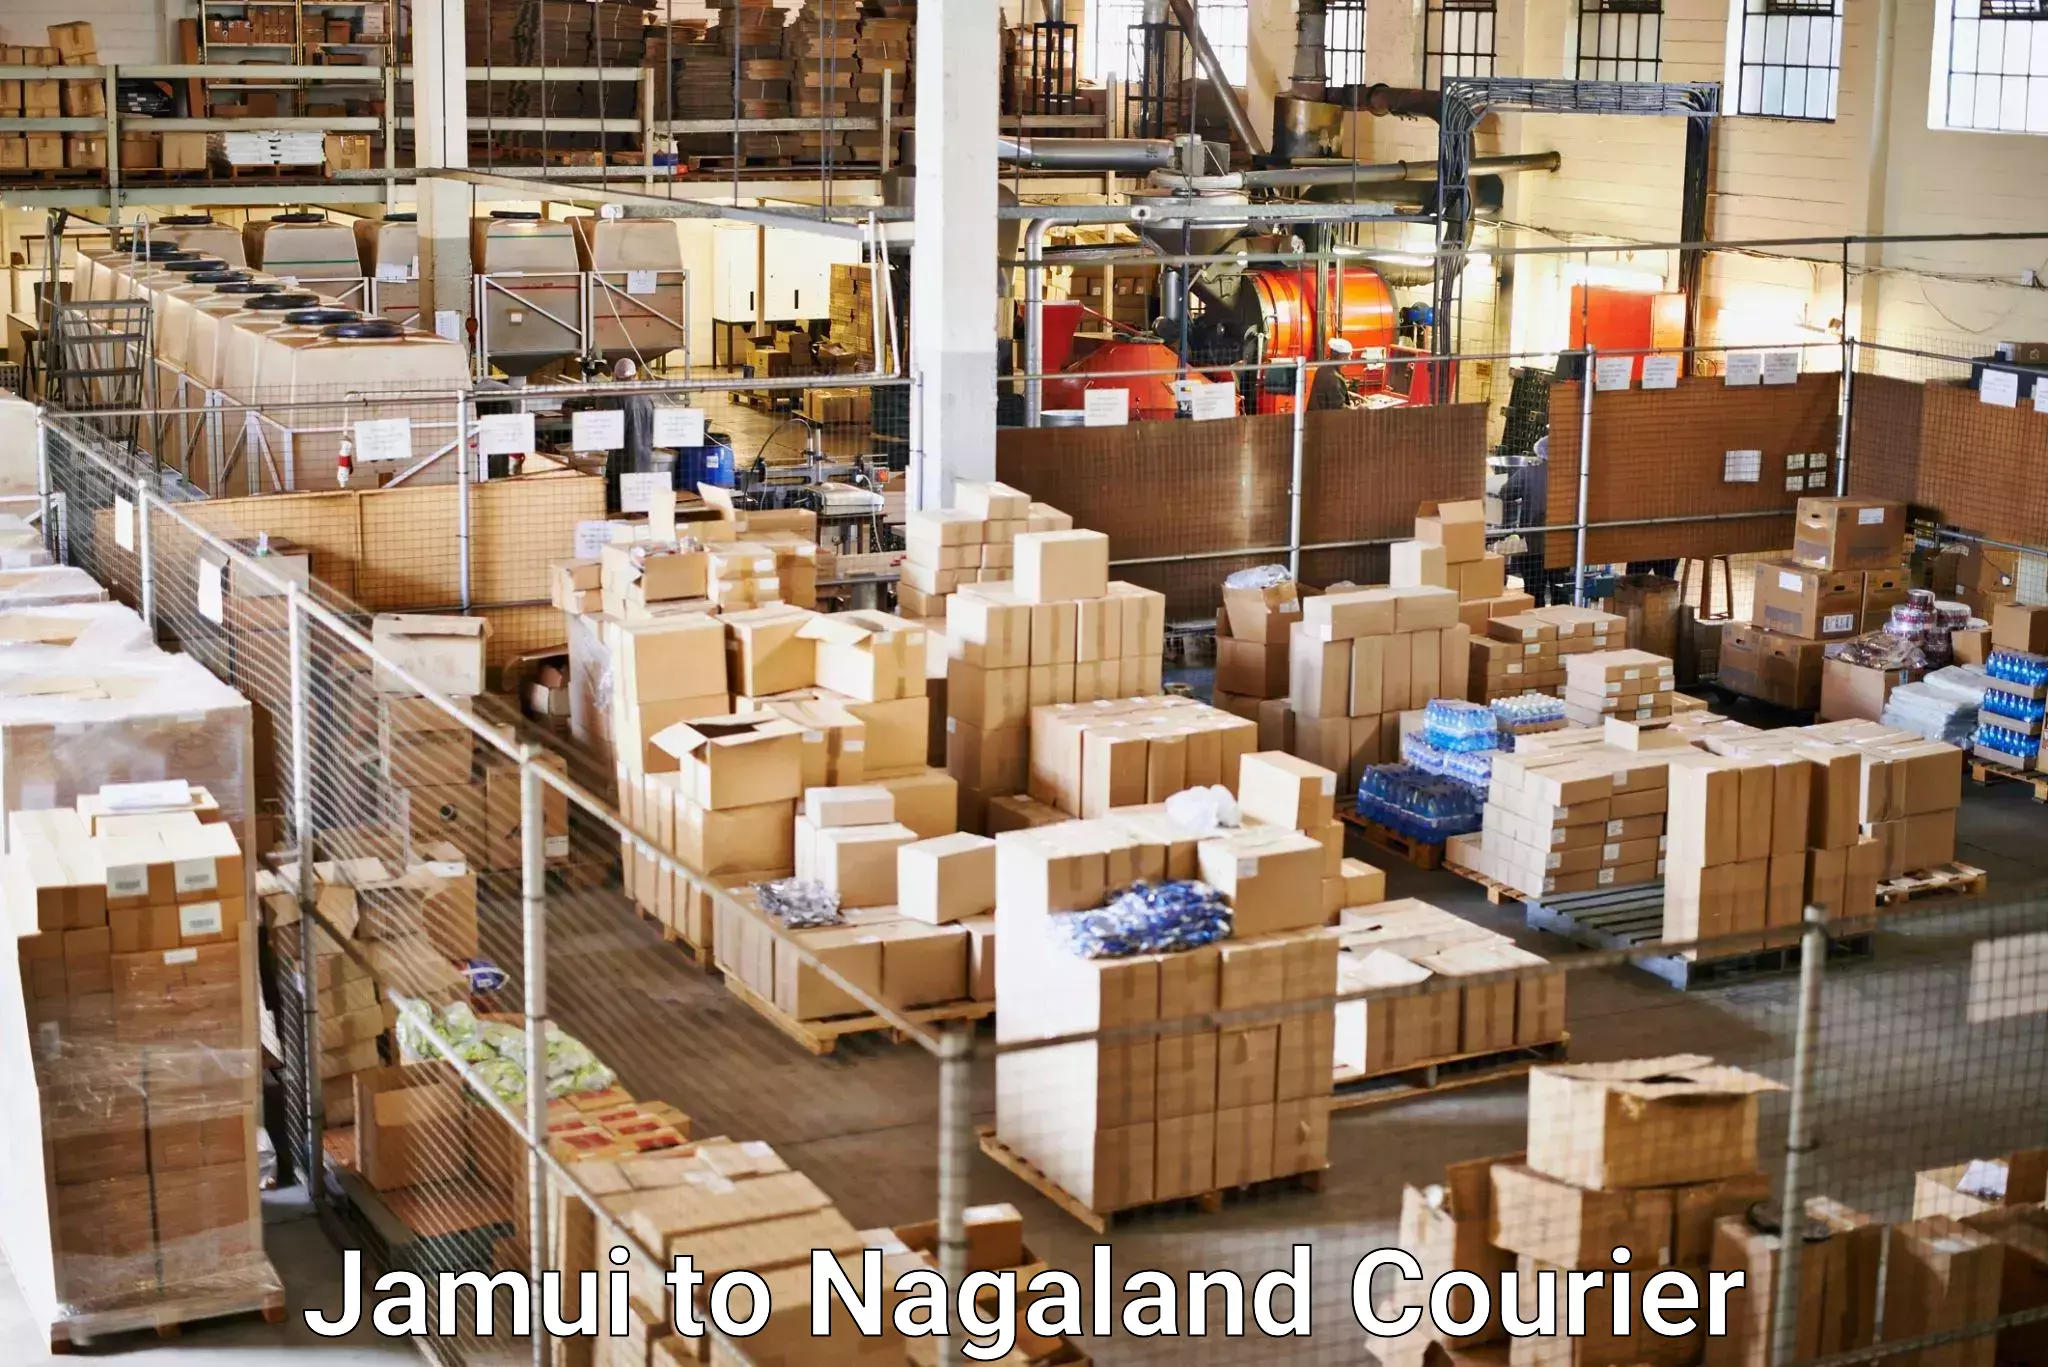 Overnight delivery services Jamui to Nagaland